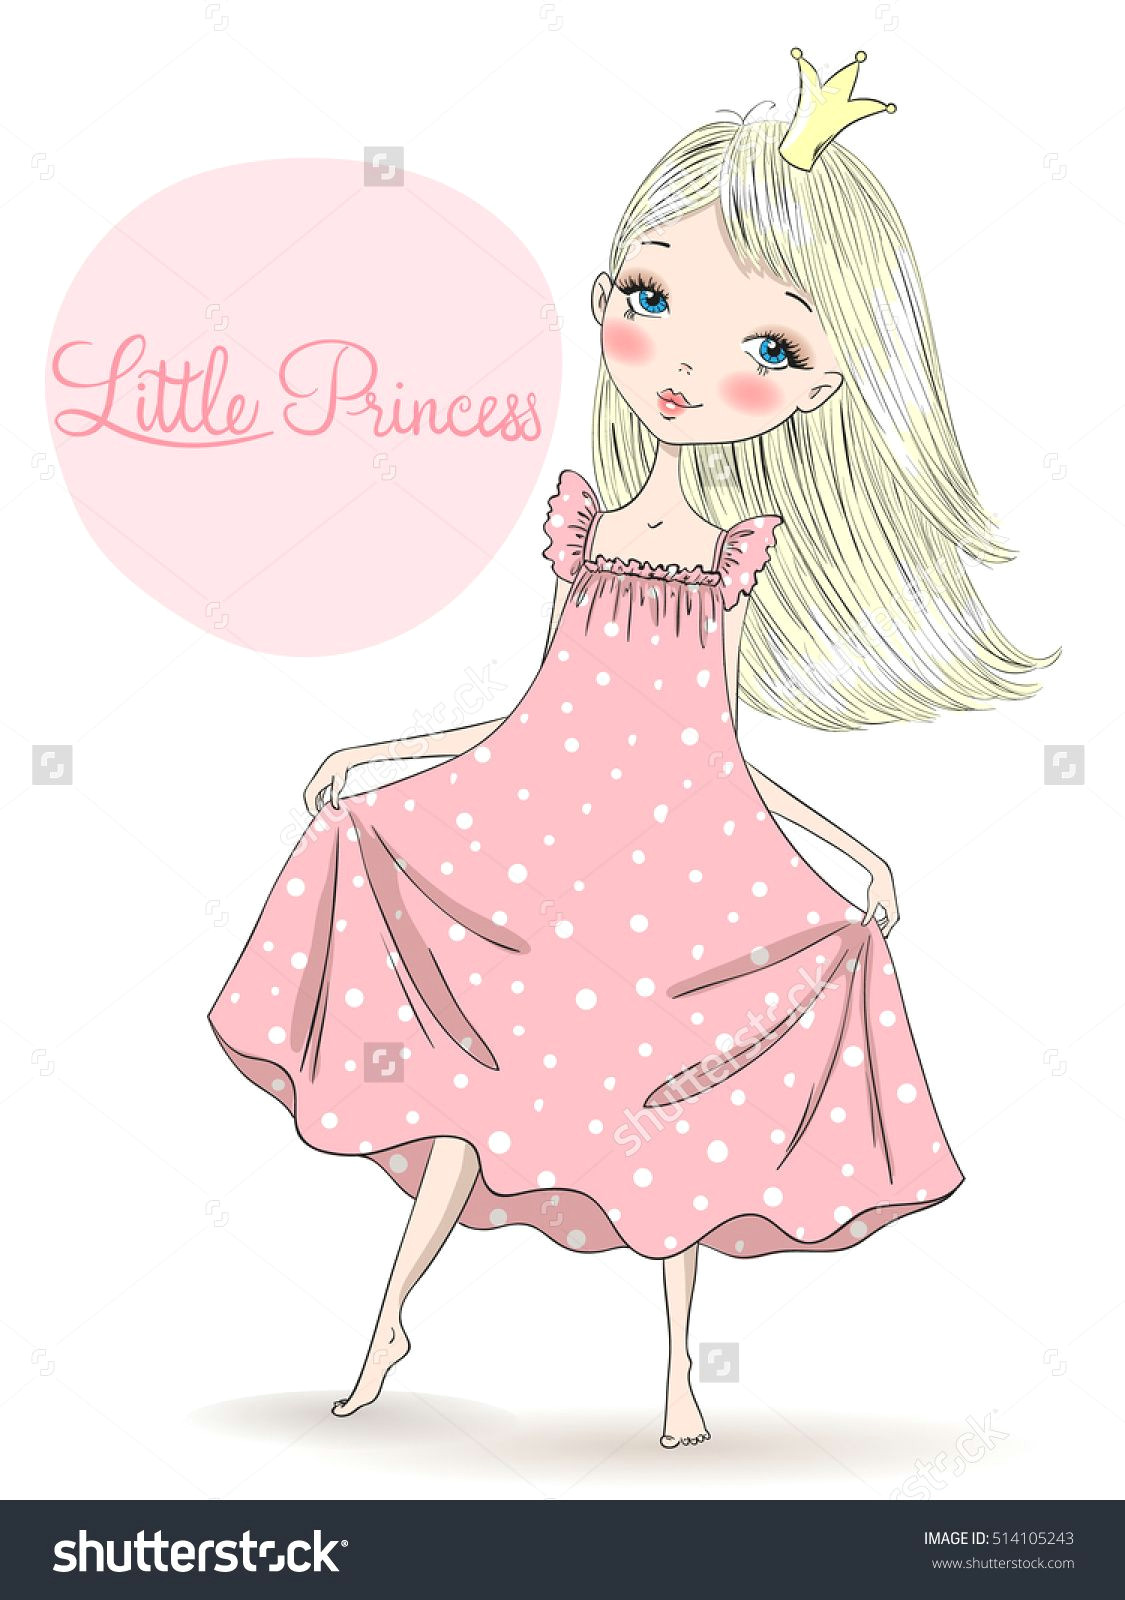 image result for cute nightdress clipart pencil illustration illustration girl girl illustrations cute